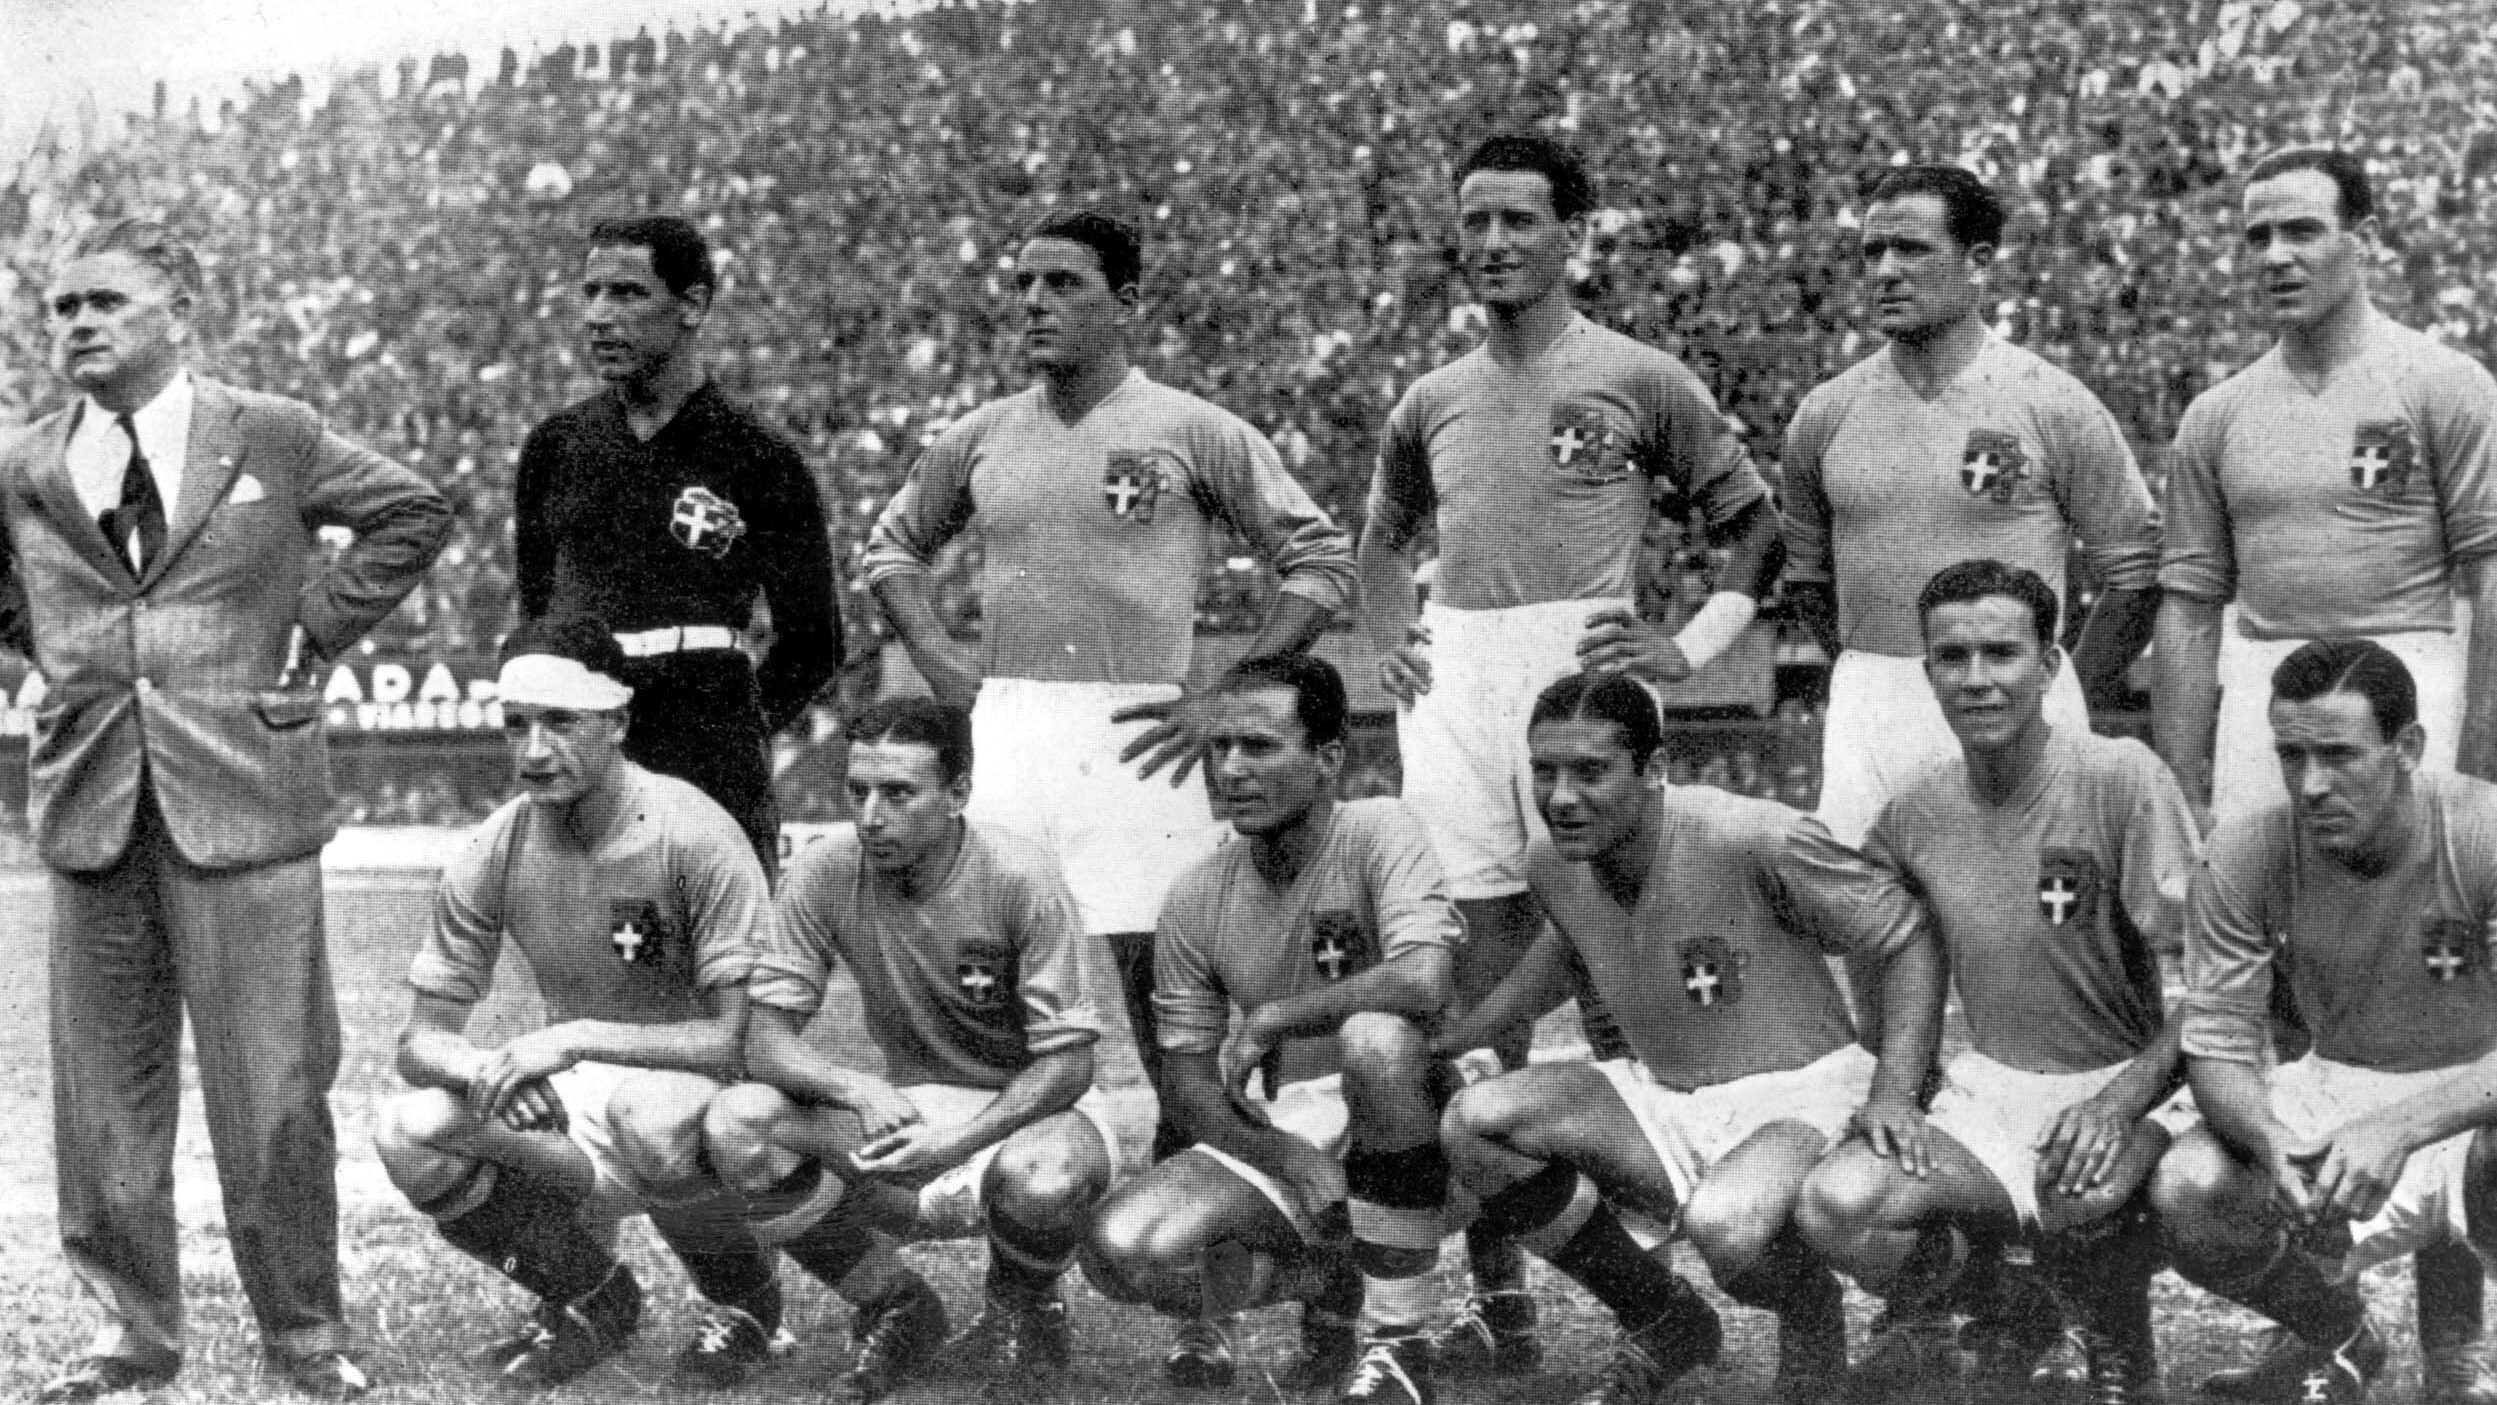 1934 FIFA World Cup Winners was Italy and runner team was Czechia